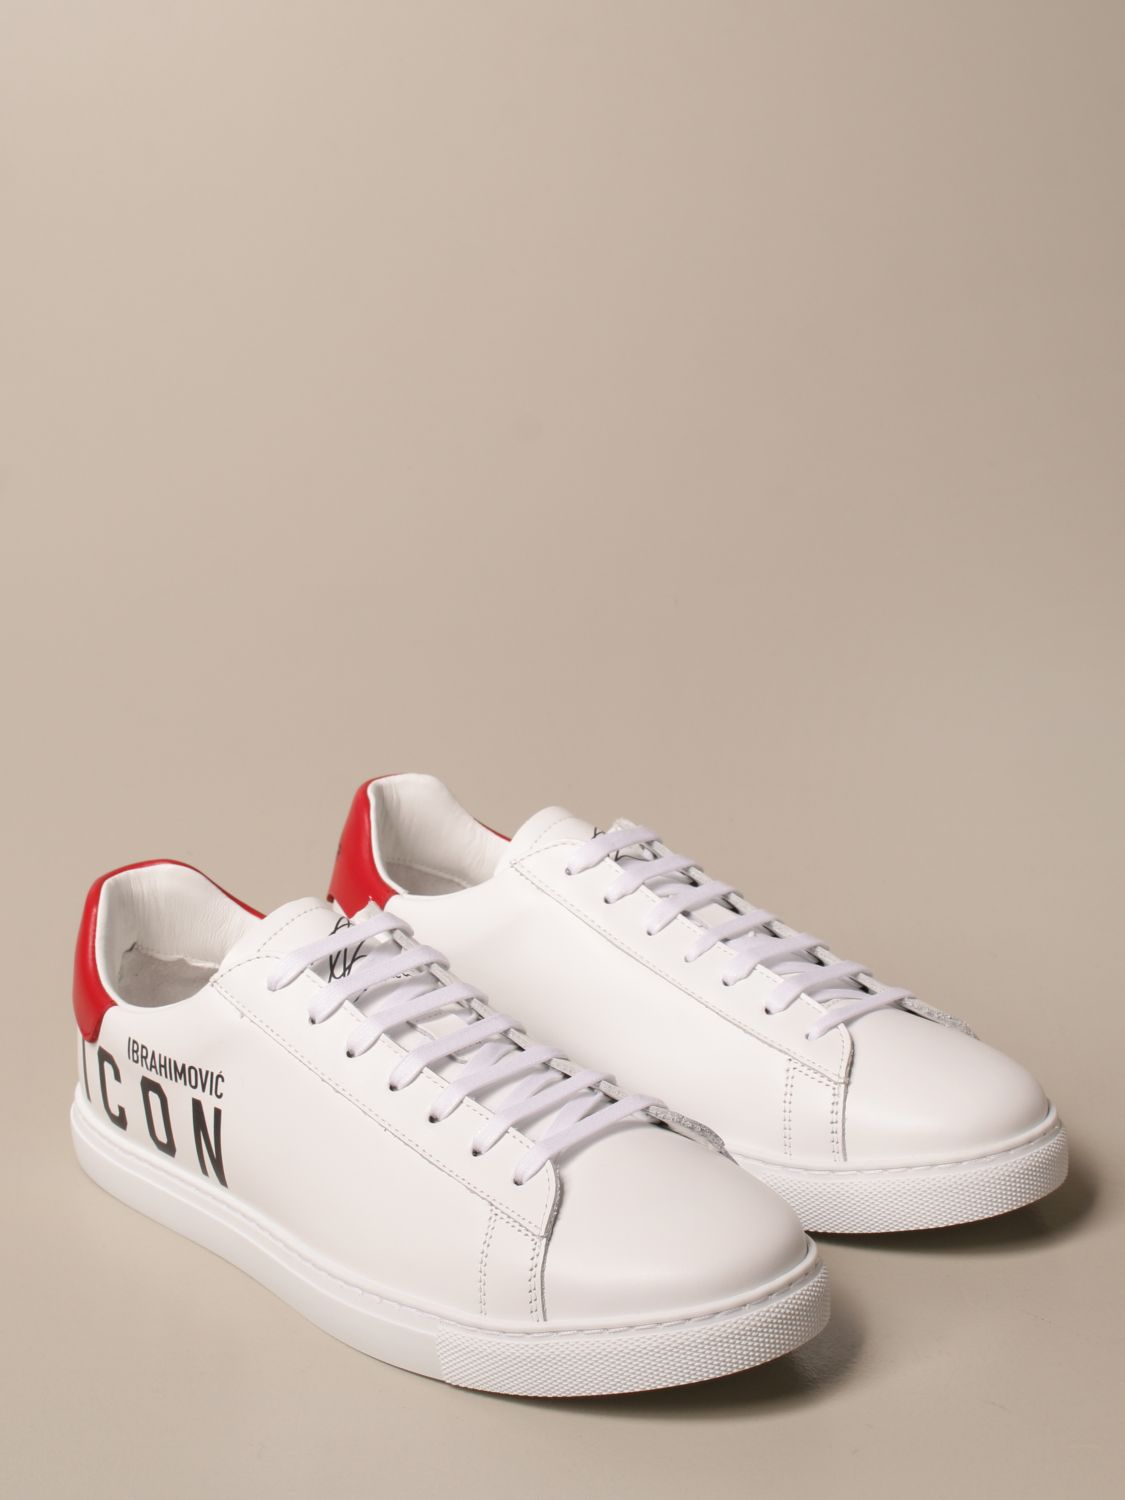 Icon Ibrahimovic x Dsquared2 sneakers in leather with logo